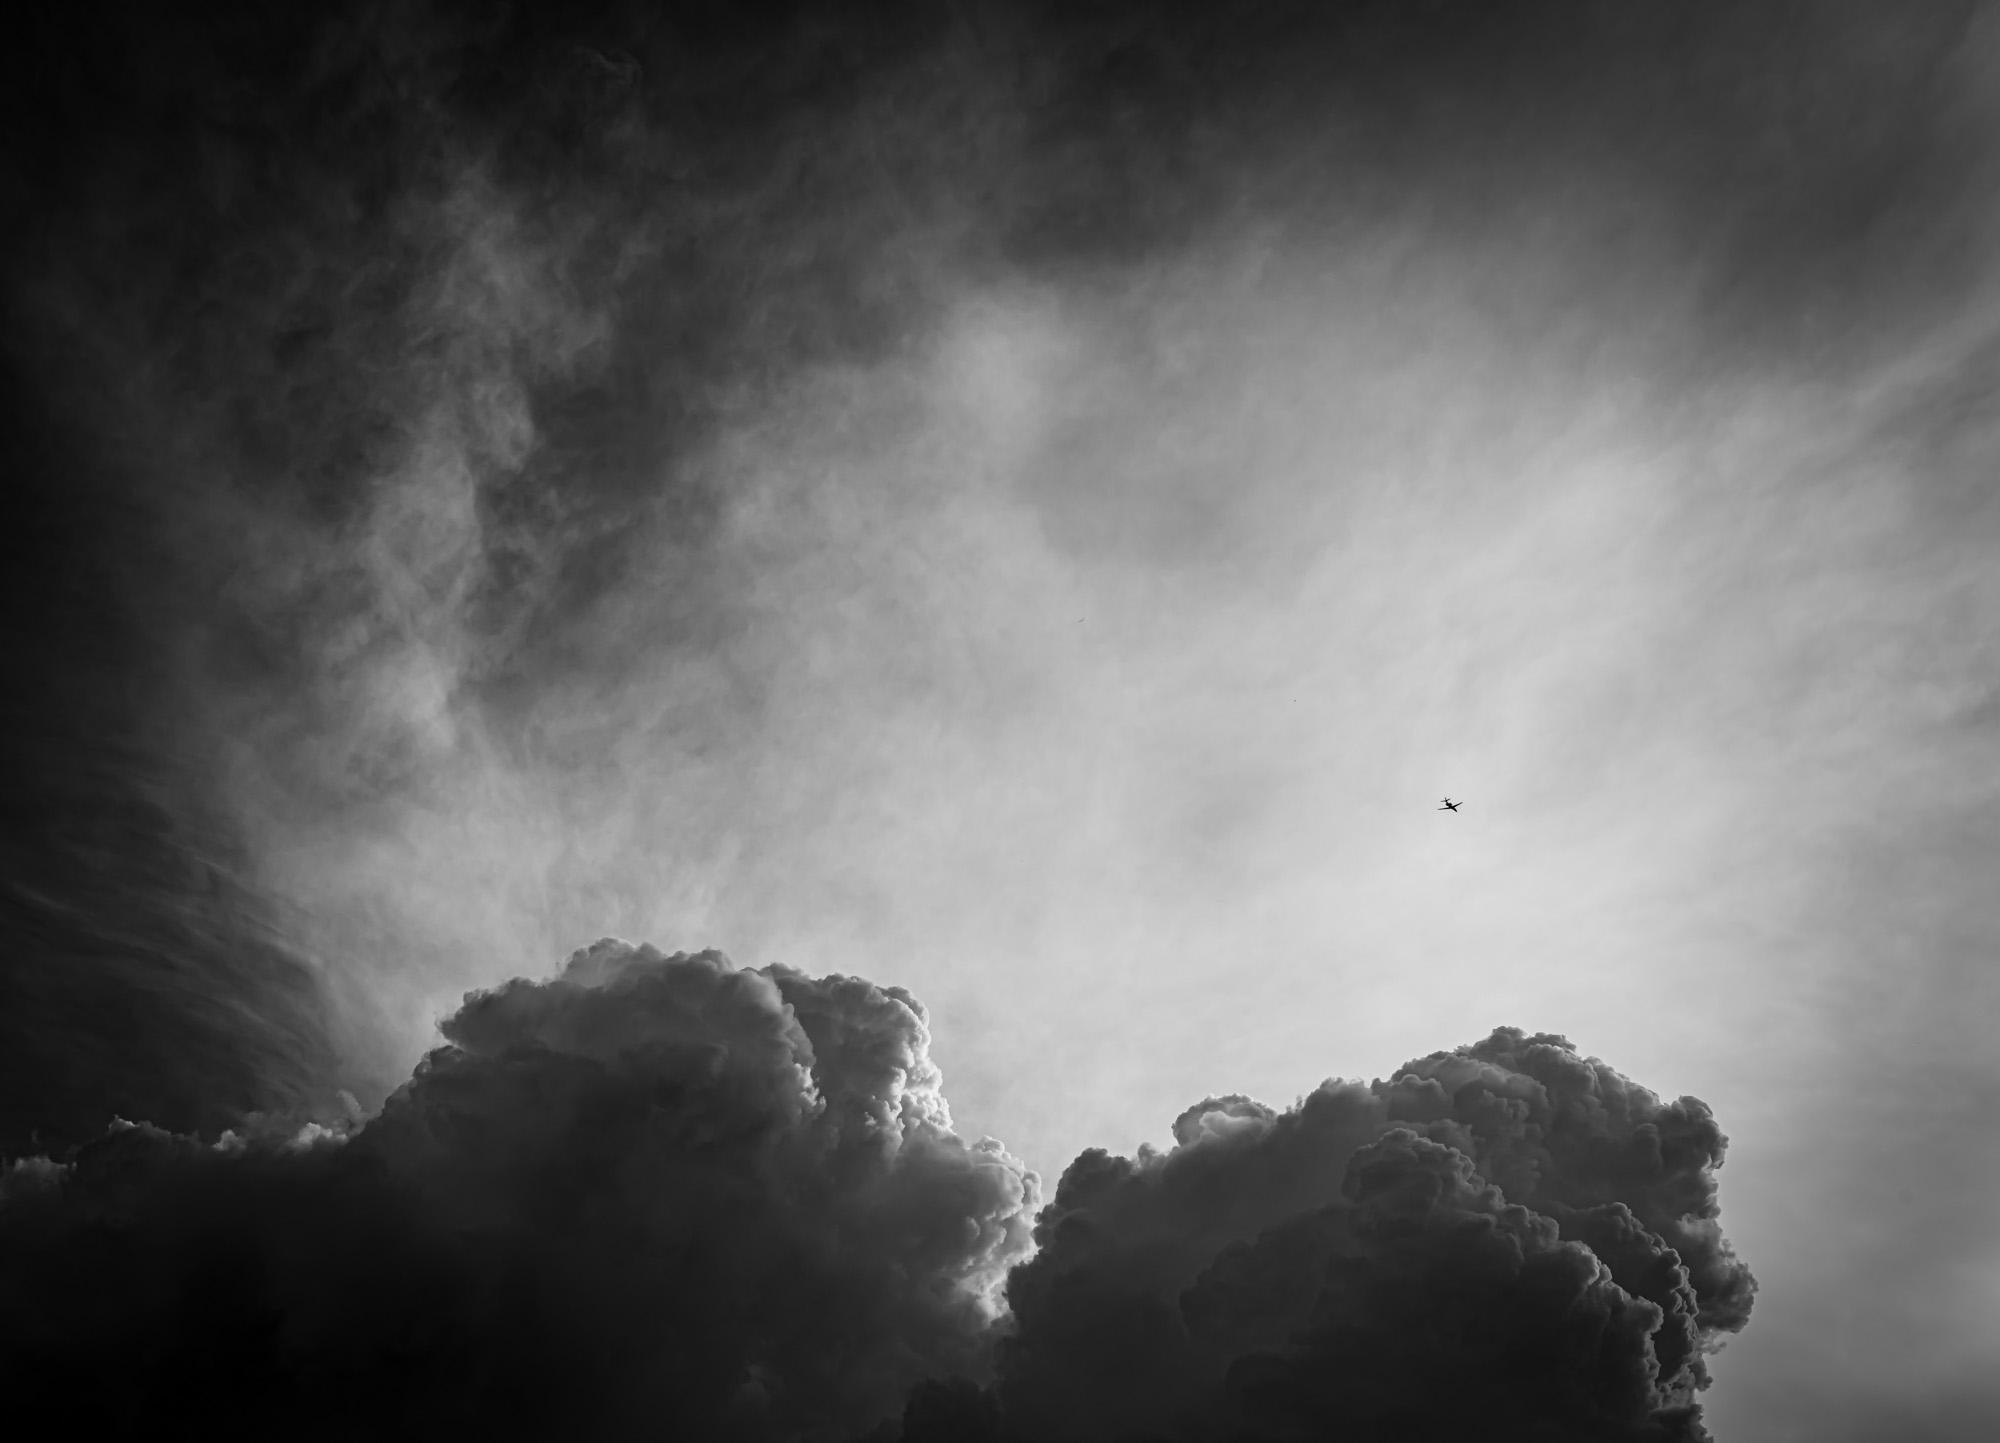 Limited Edition Black and White Photograph "Flying Above the Clouds" 20 x 24